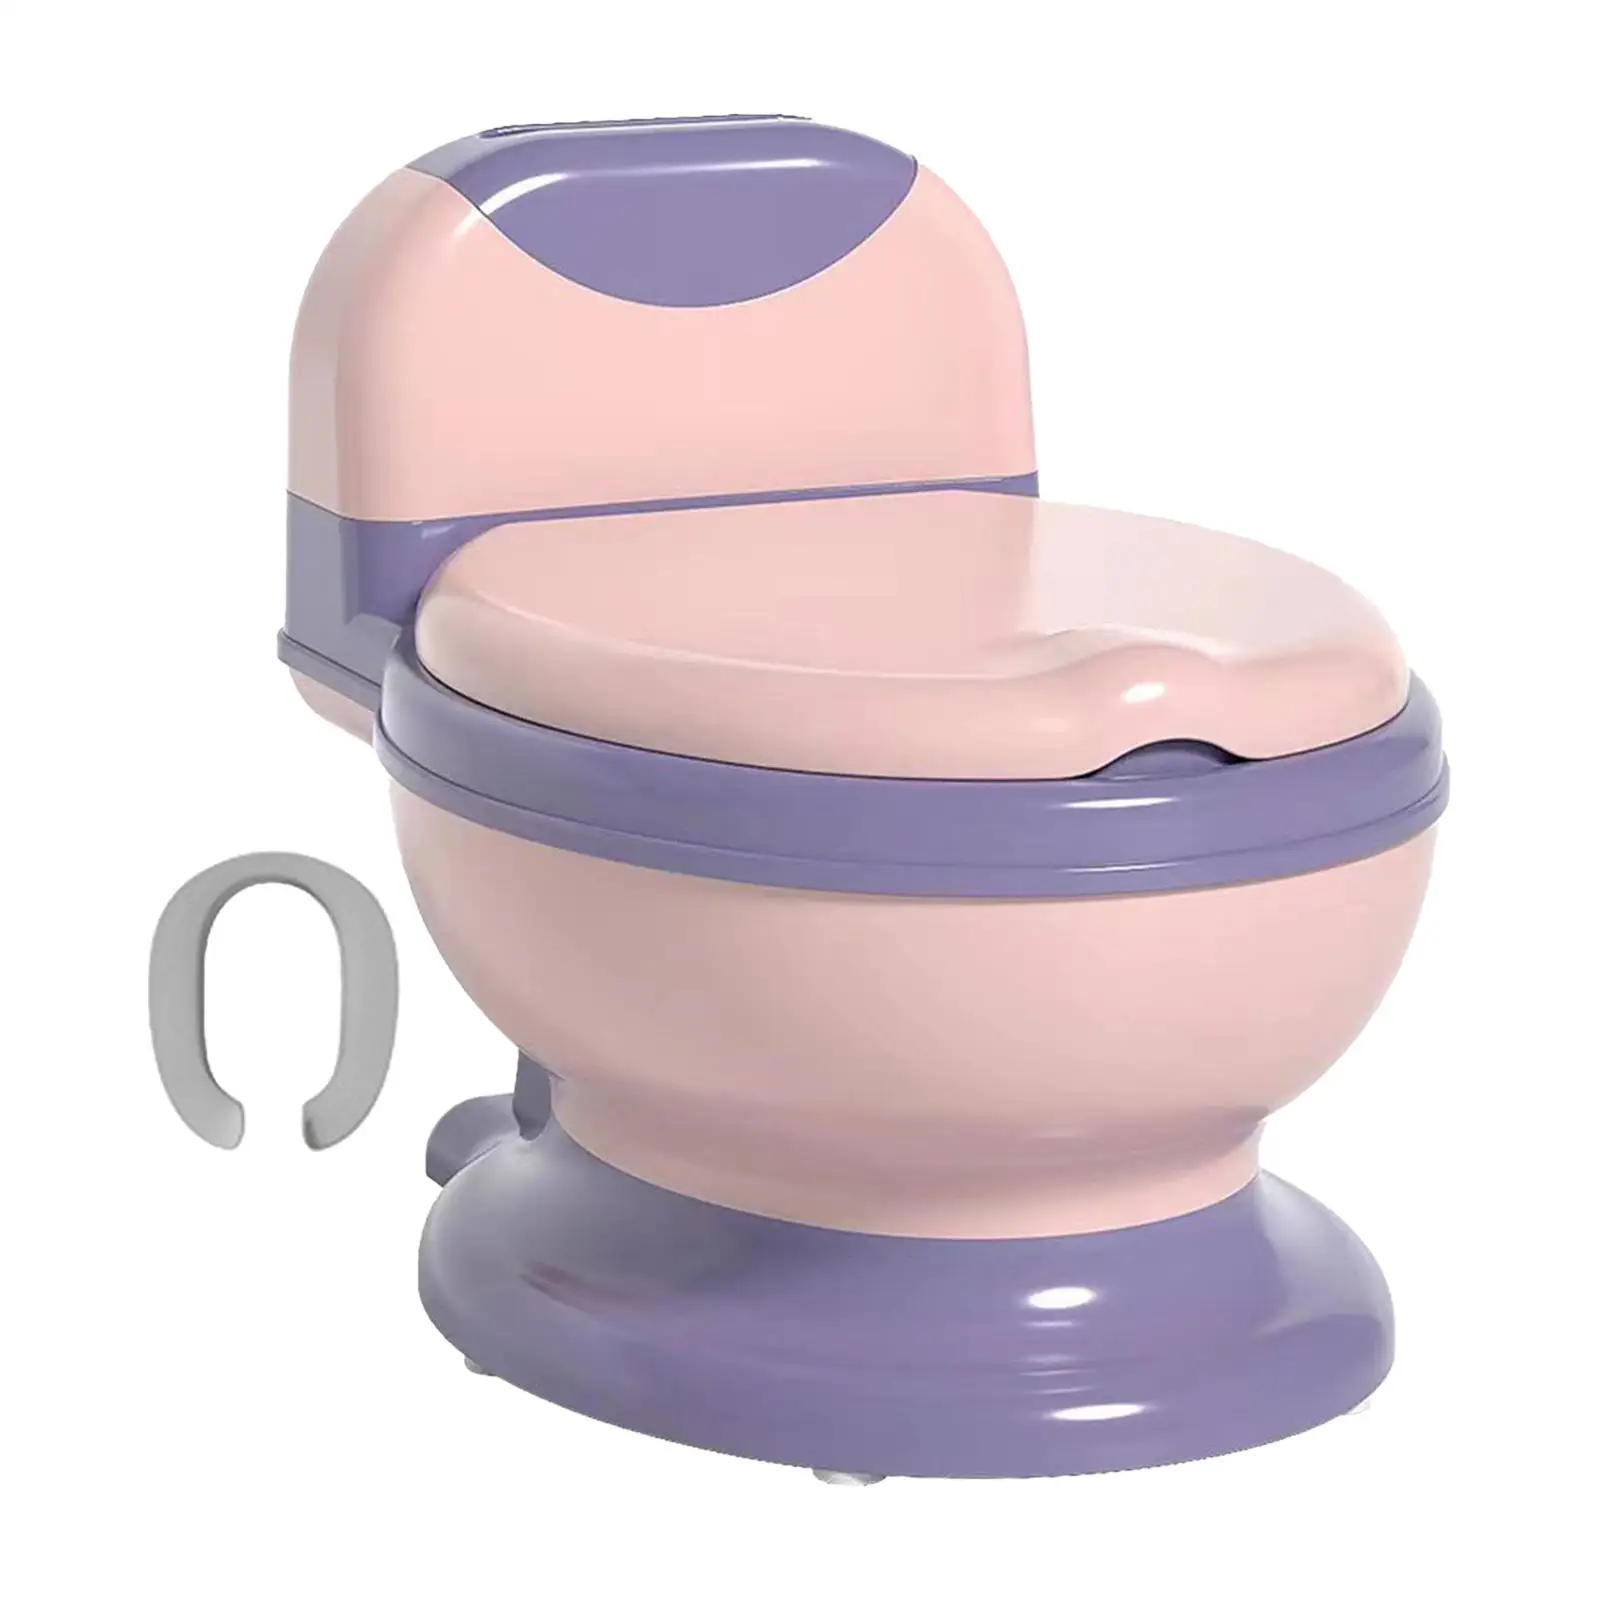 Potty Train Toilet Portable Detachable Comfortable Realistic Toilet Real Feel Potty for Kids Baby Children Toddlers Girls